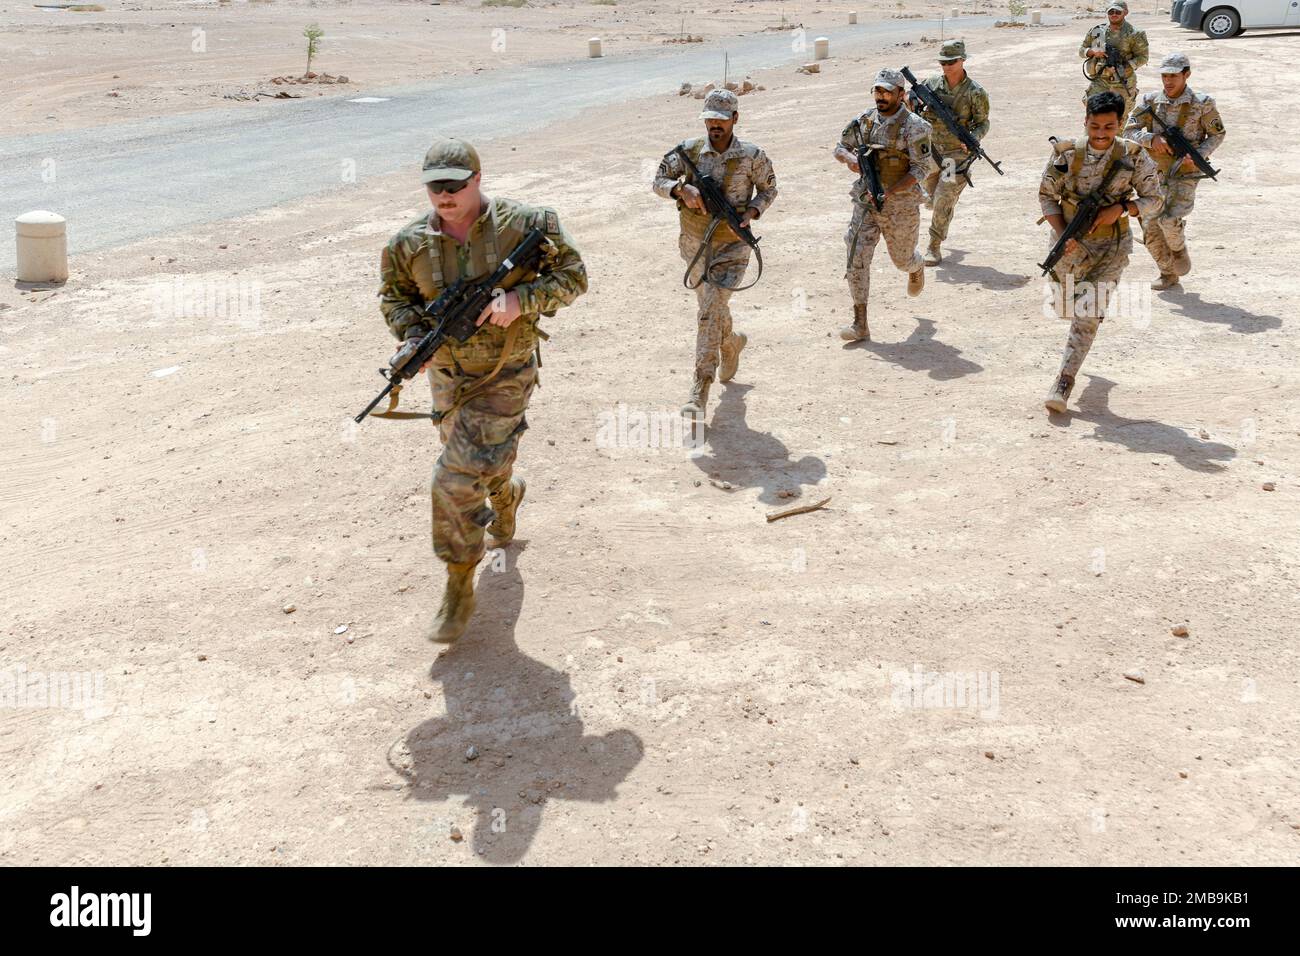 U.S. Air Force Senior Airman Zachary Fooks, assigned to the 378th Expeditionary Security Forces Squadron, leads Royal Saudi Land Force soldiers and U.S. Soldiers assigned to Task Force Hurricane in a rush to a mission objective, during a training exercise in Al-Kharj, Kingdom of Saudi Arabia, June 13, 2022. Eight USAF Defenders were invited by the U.S. Army to attend Task Force Hurricane’s platoon immersion course alongside the Royal Saudi Land Force. The immersion allowed the 378th ESFS members a chance to develop as multi-capable Airmen by learning both Joint Force infantry tactics and Partn Stock Photo